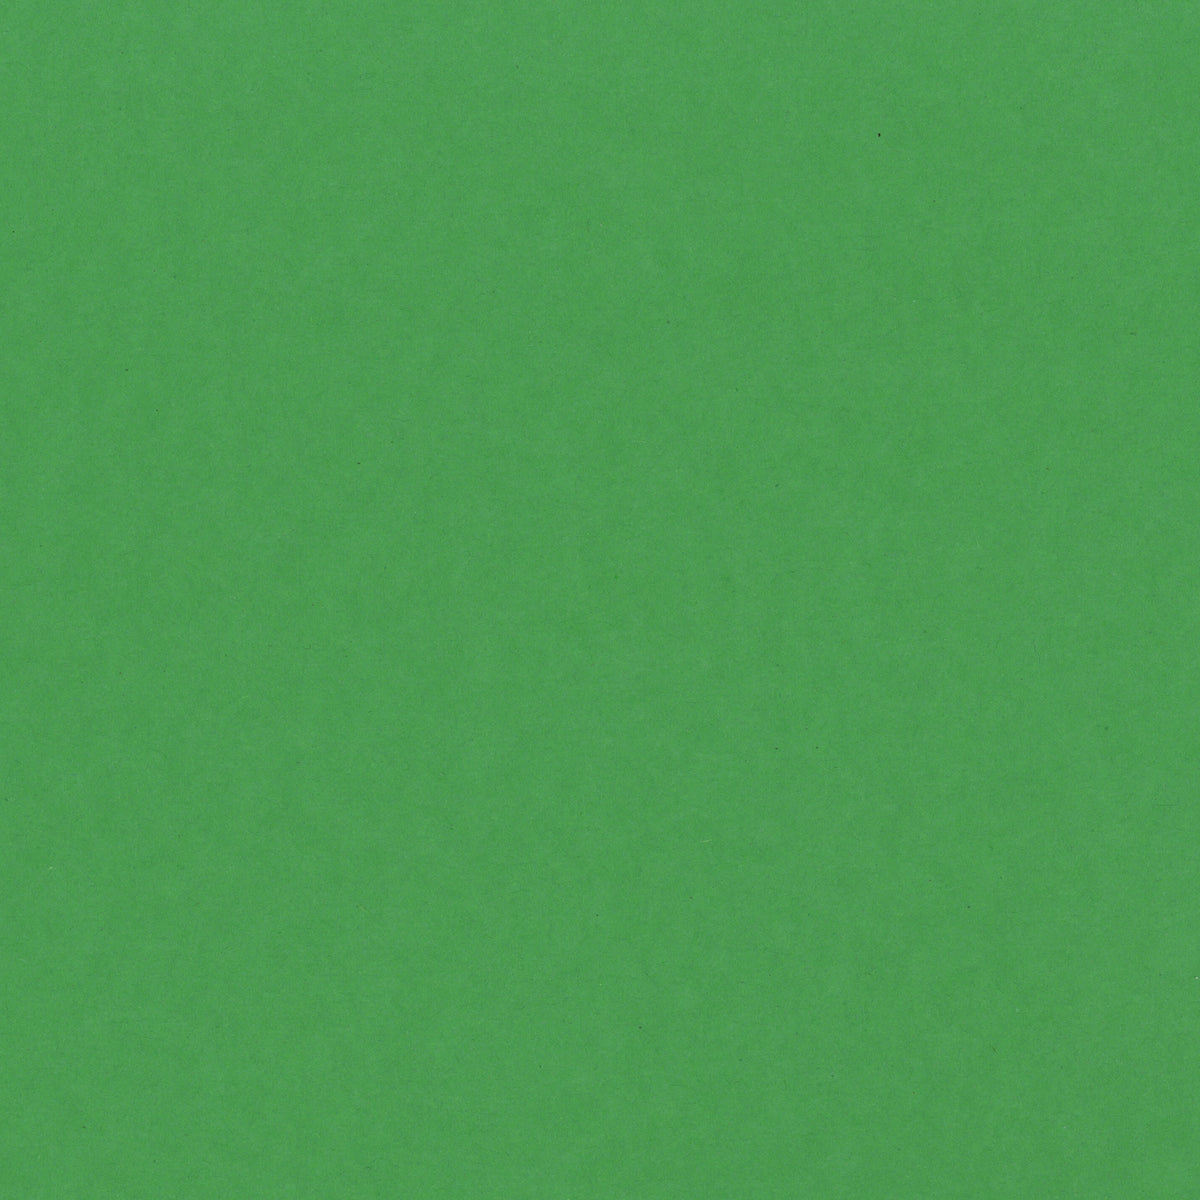 Buy and print on Colorset Spring Green 270gsm paper, available at   – RISOTTO